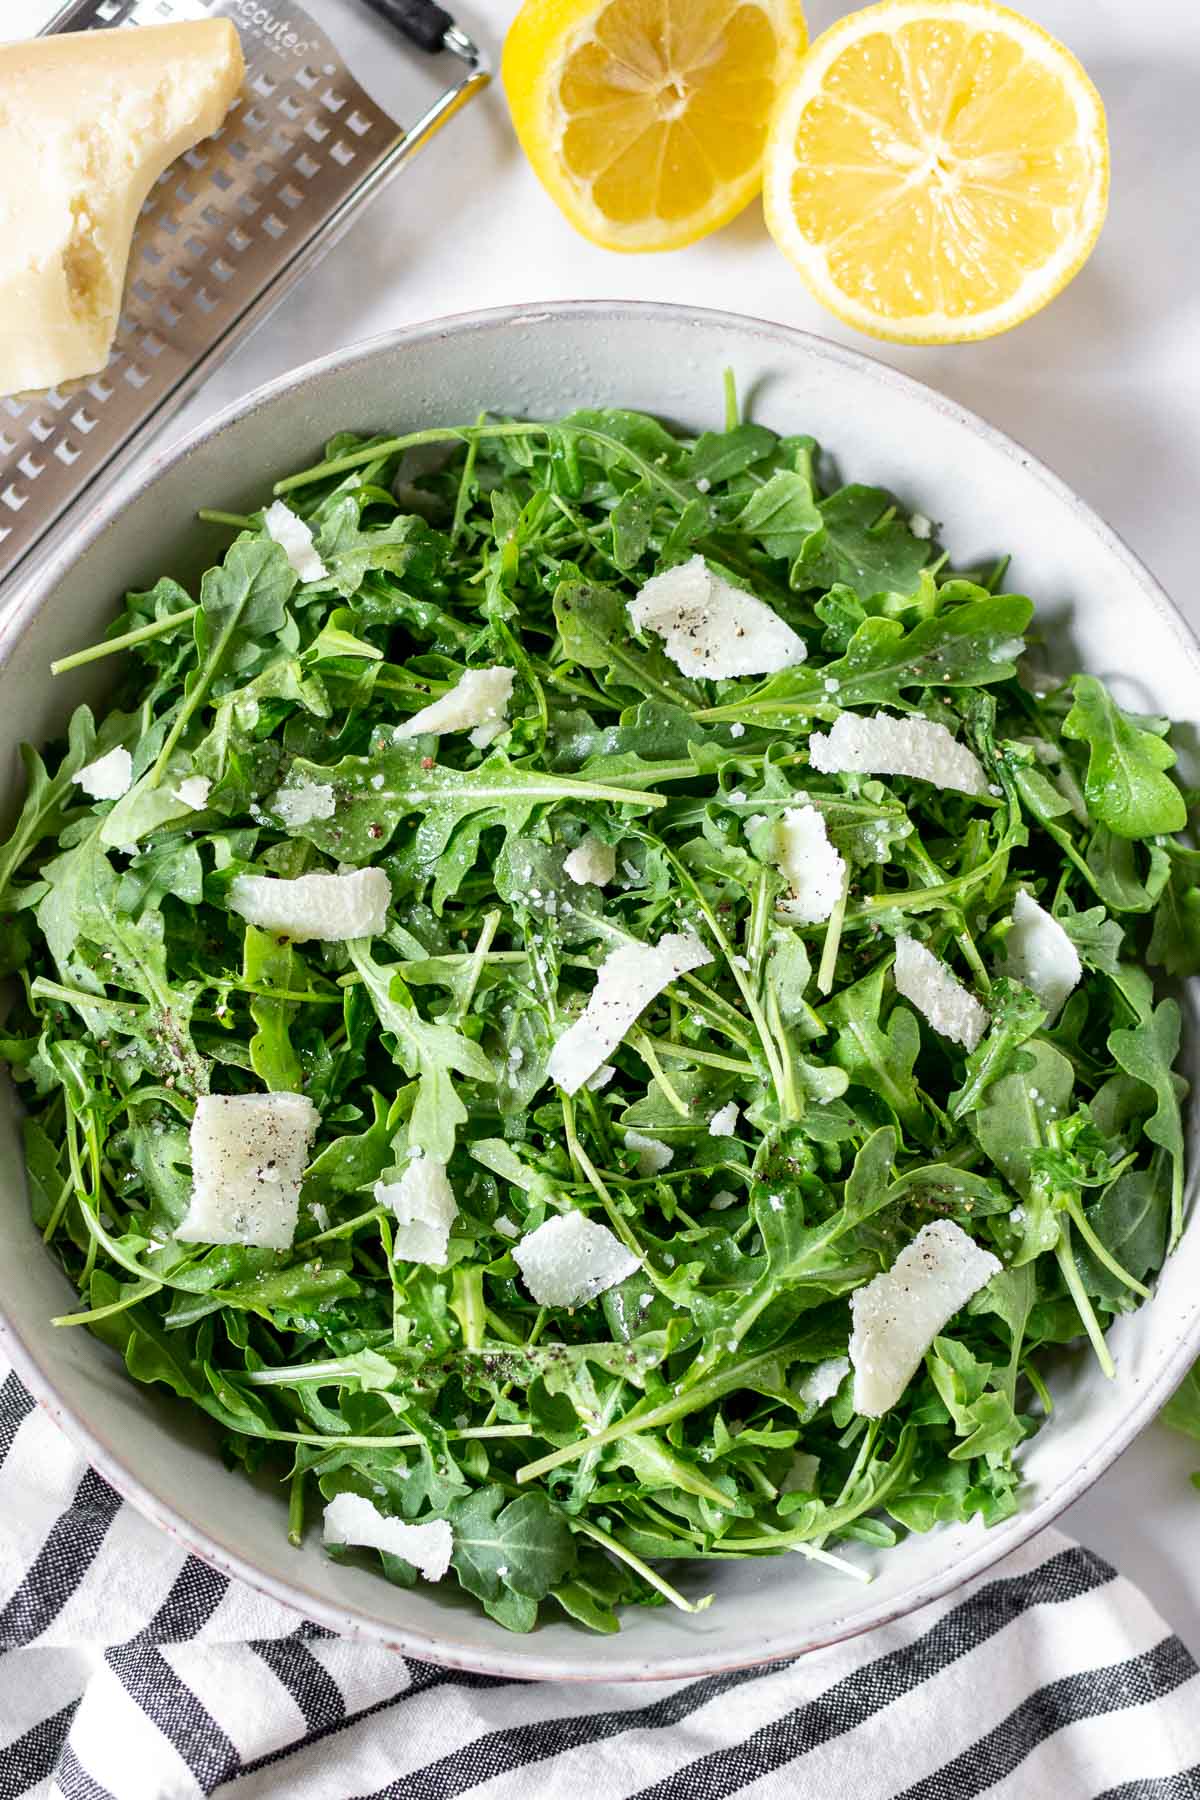 Simple arugula salad in a bowl with parmesan shavings and lemons and cheese on the side.